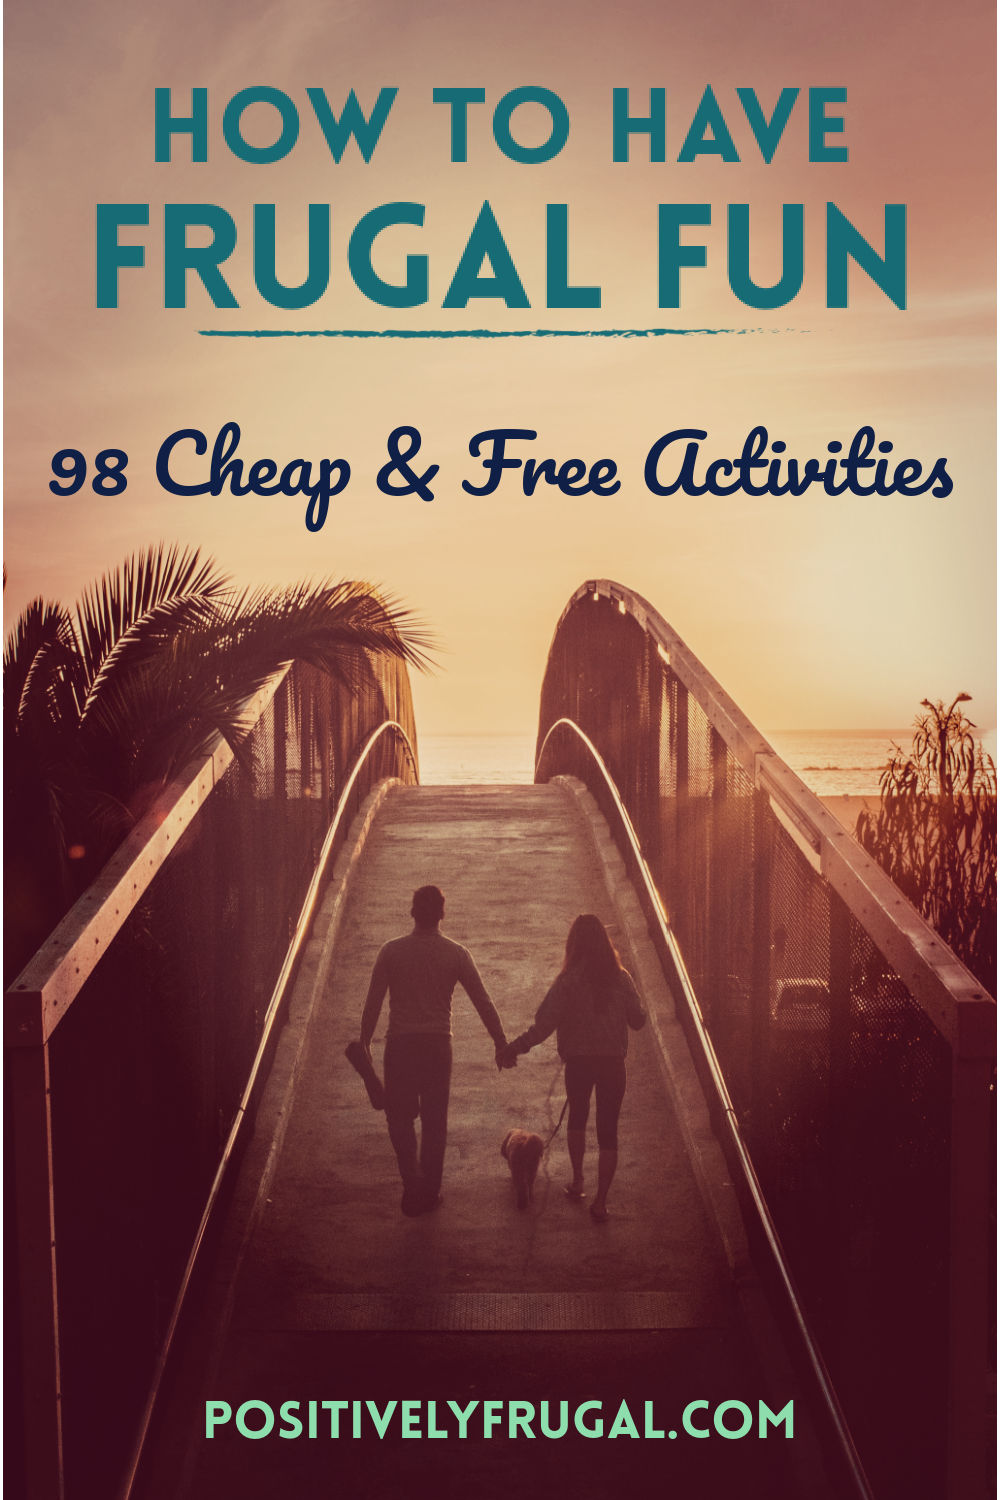 How To Have Frugal Fun 98 Cheap and Free Activities by PositivelyFrugal.com